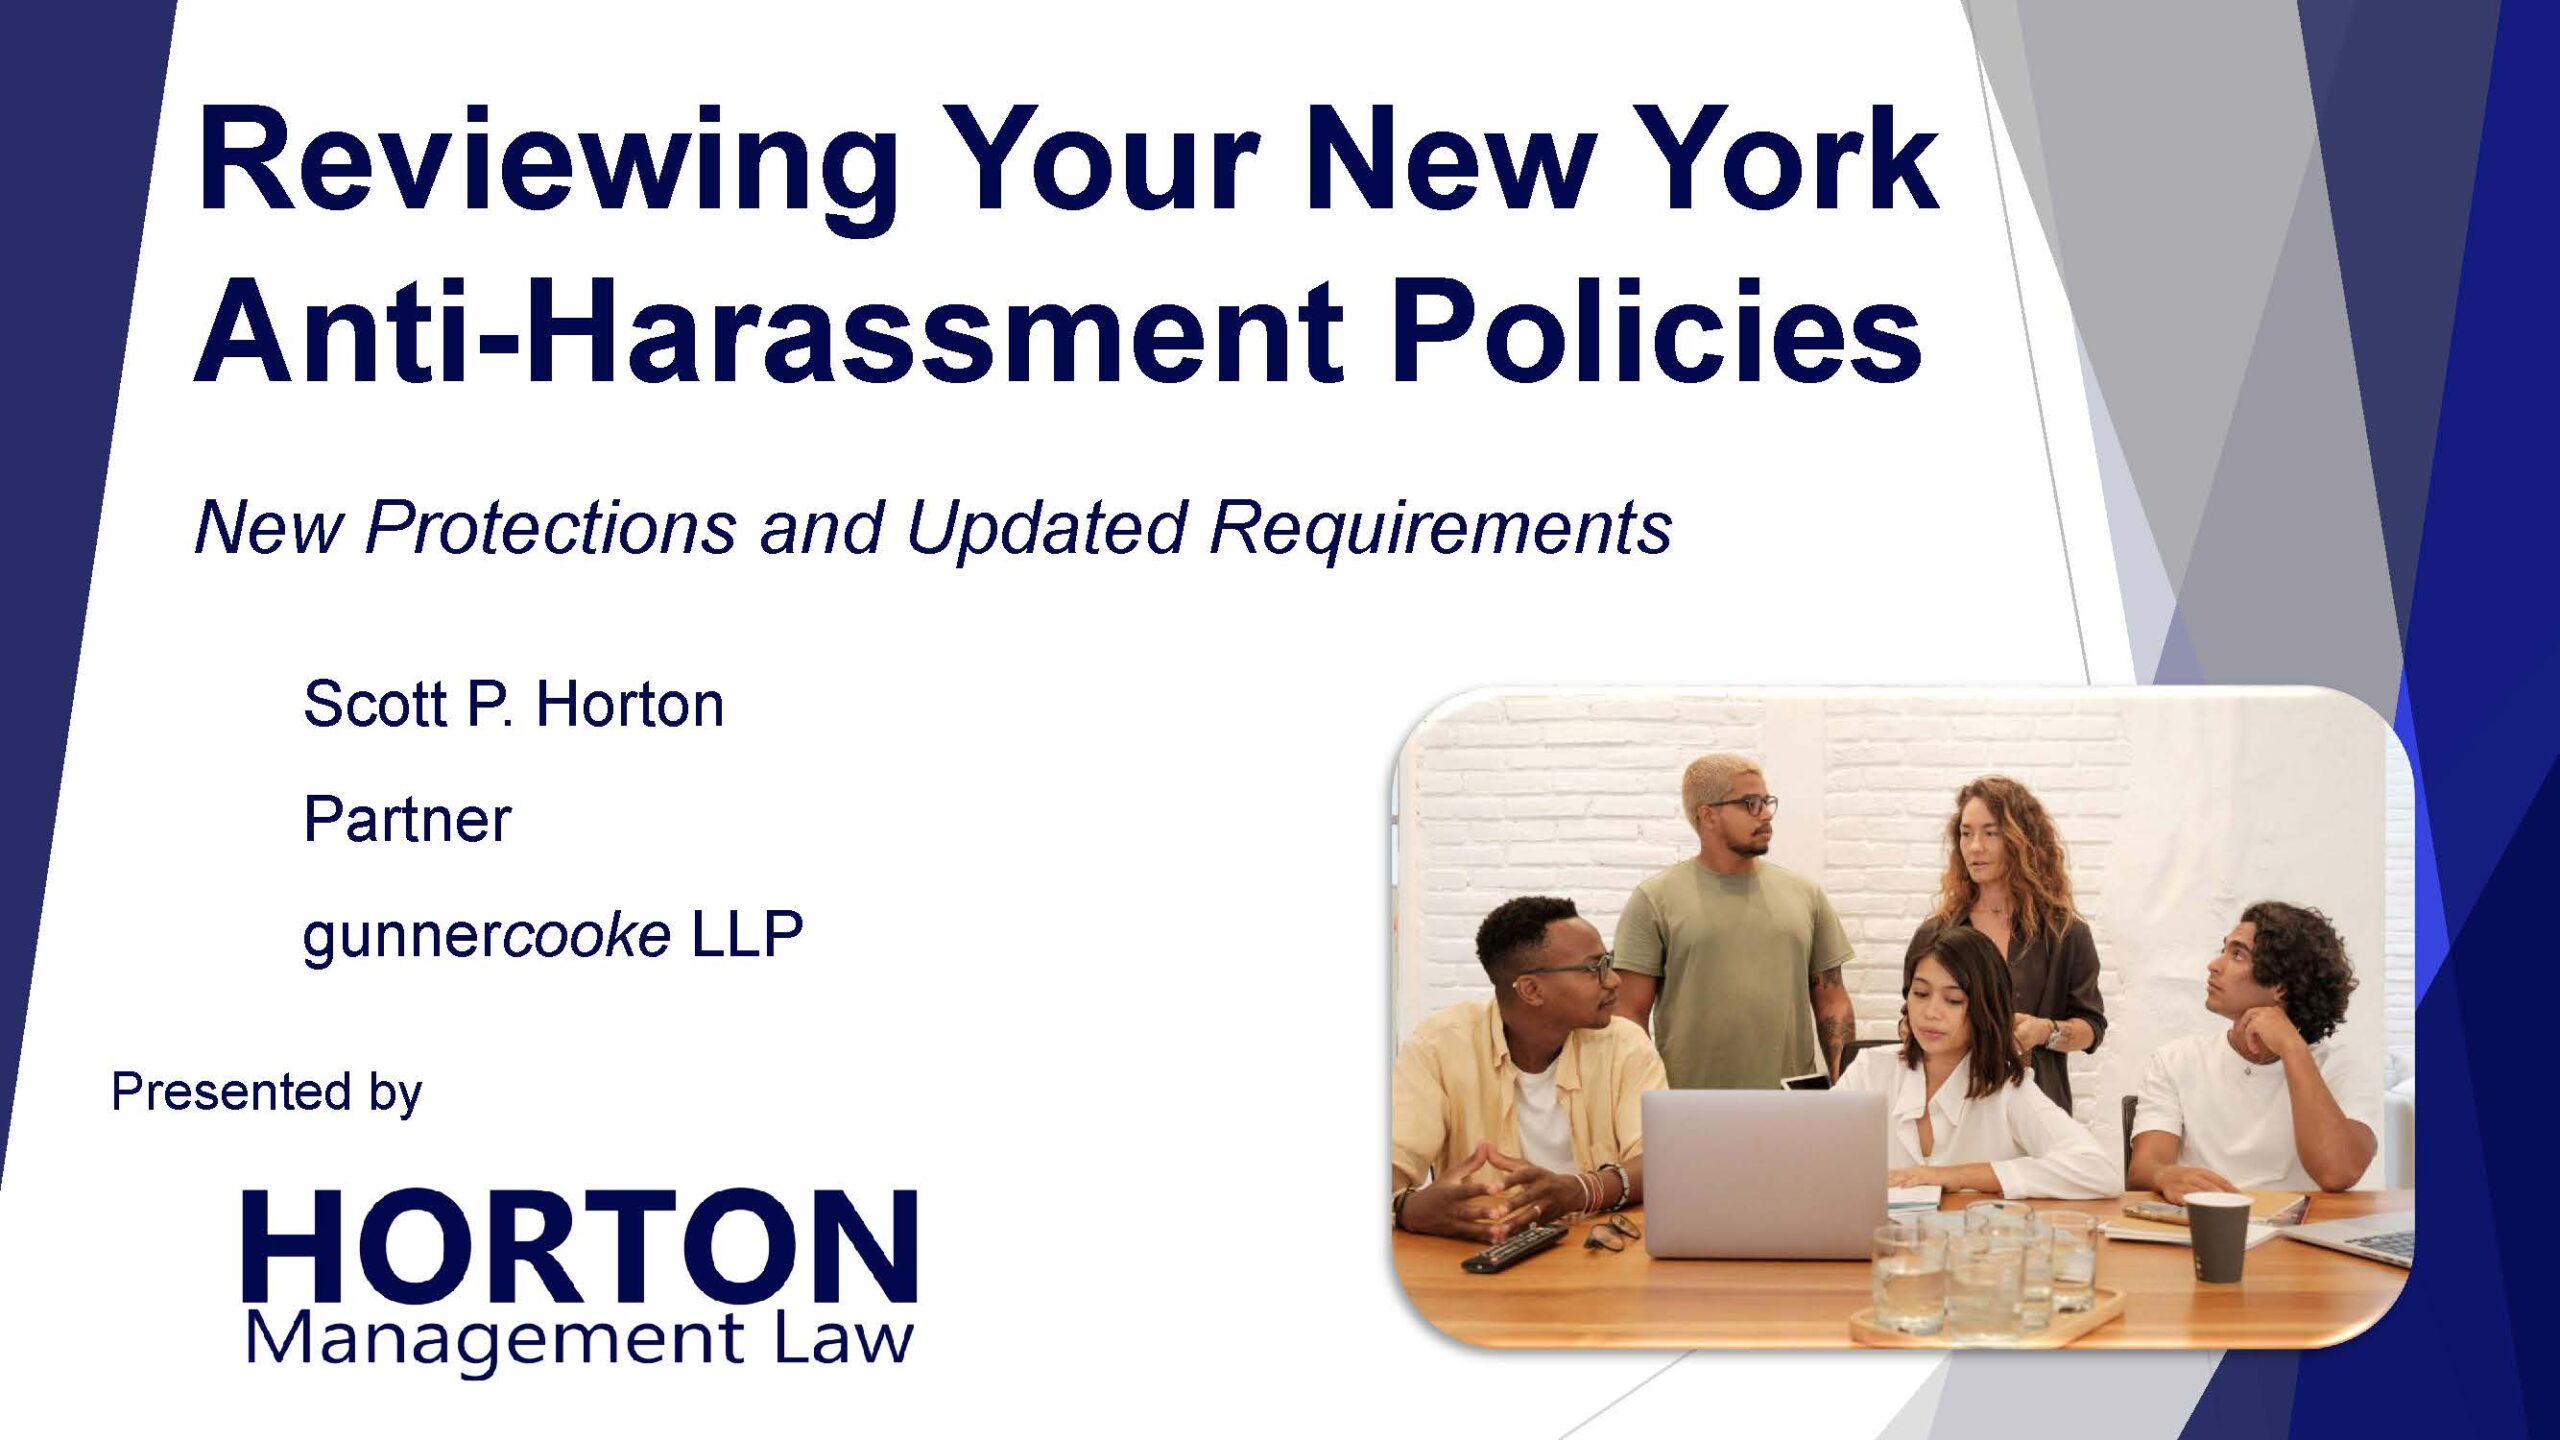 Reviewing Your New York Anti-Harassment Policies